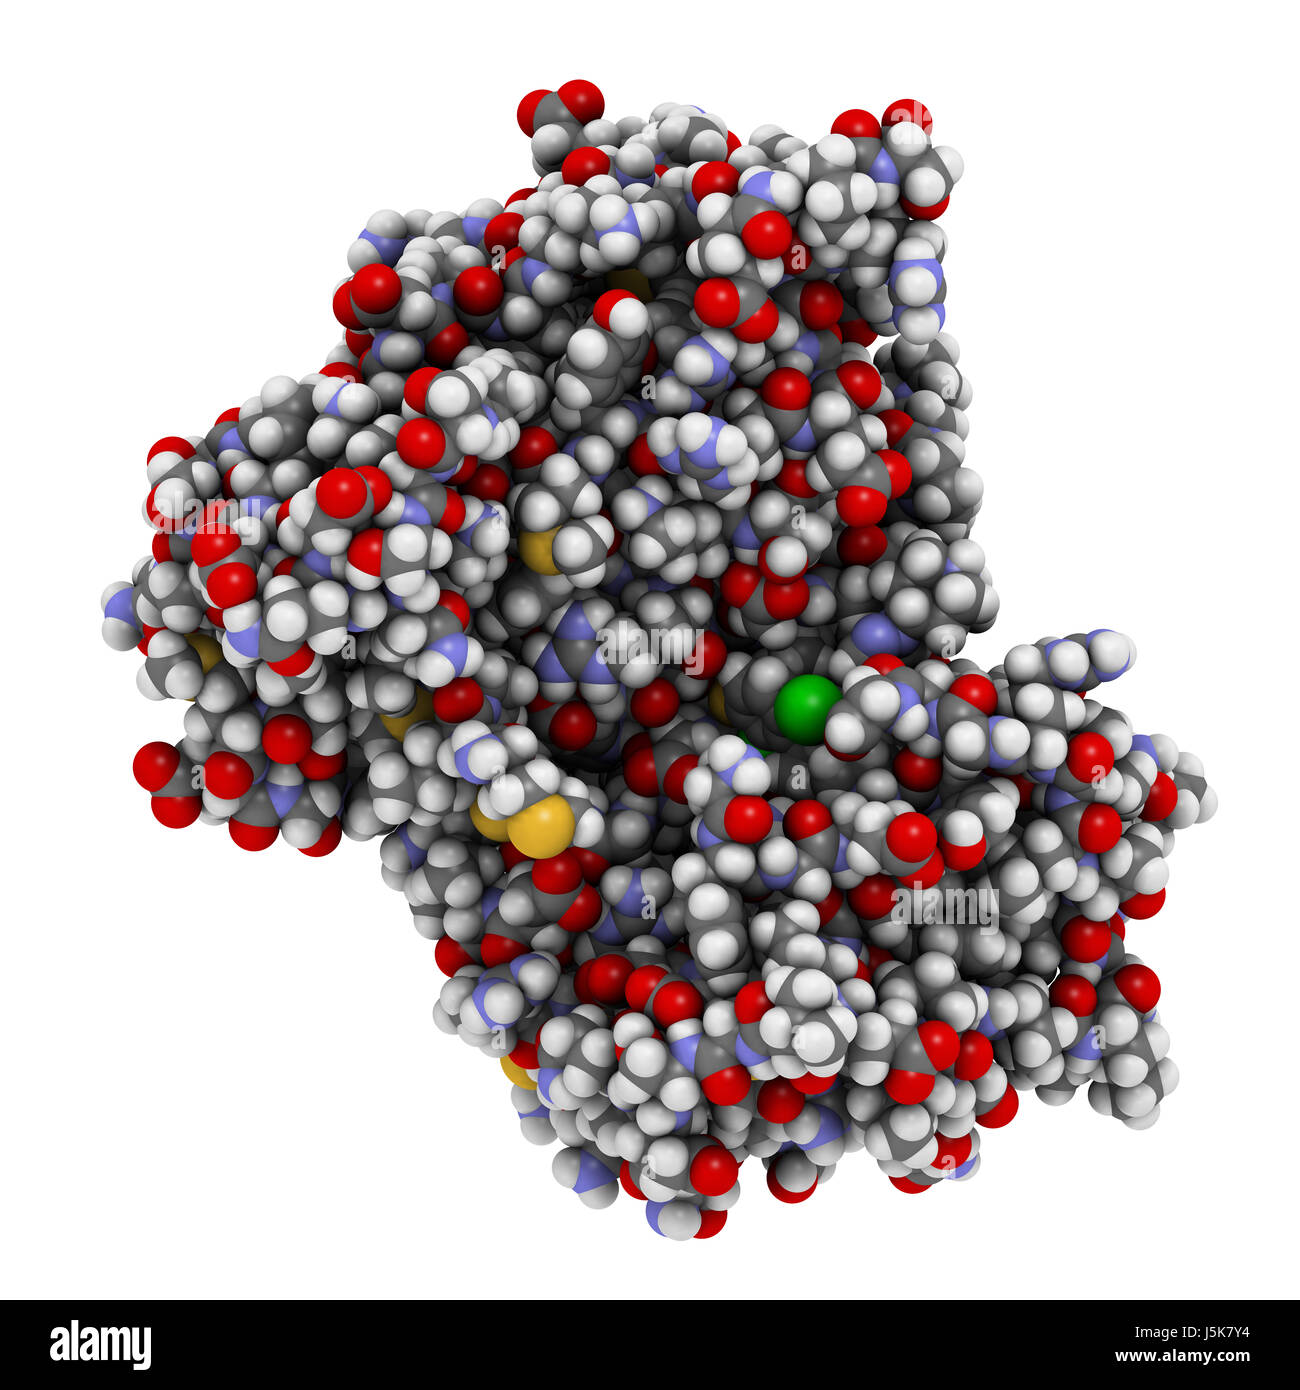 Anaplastic lymphoma kinase (ALK, tyrosine kinase domain) protein. Shown in complex with the inhibitor crizotinib. 3D rendering. Stock Photo